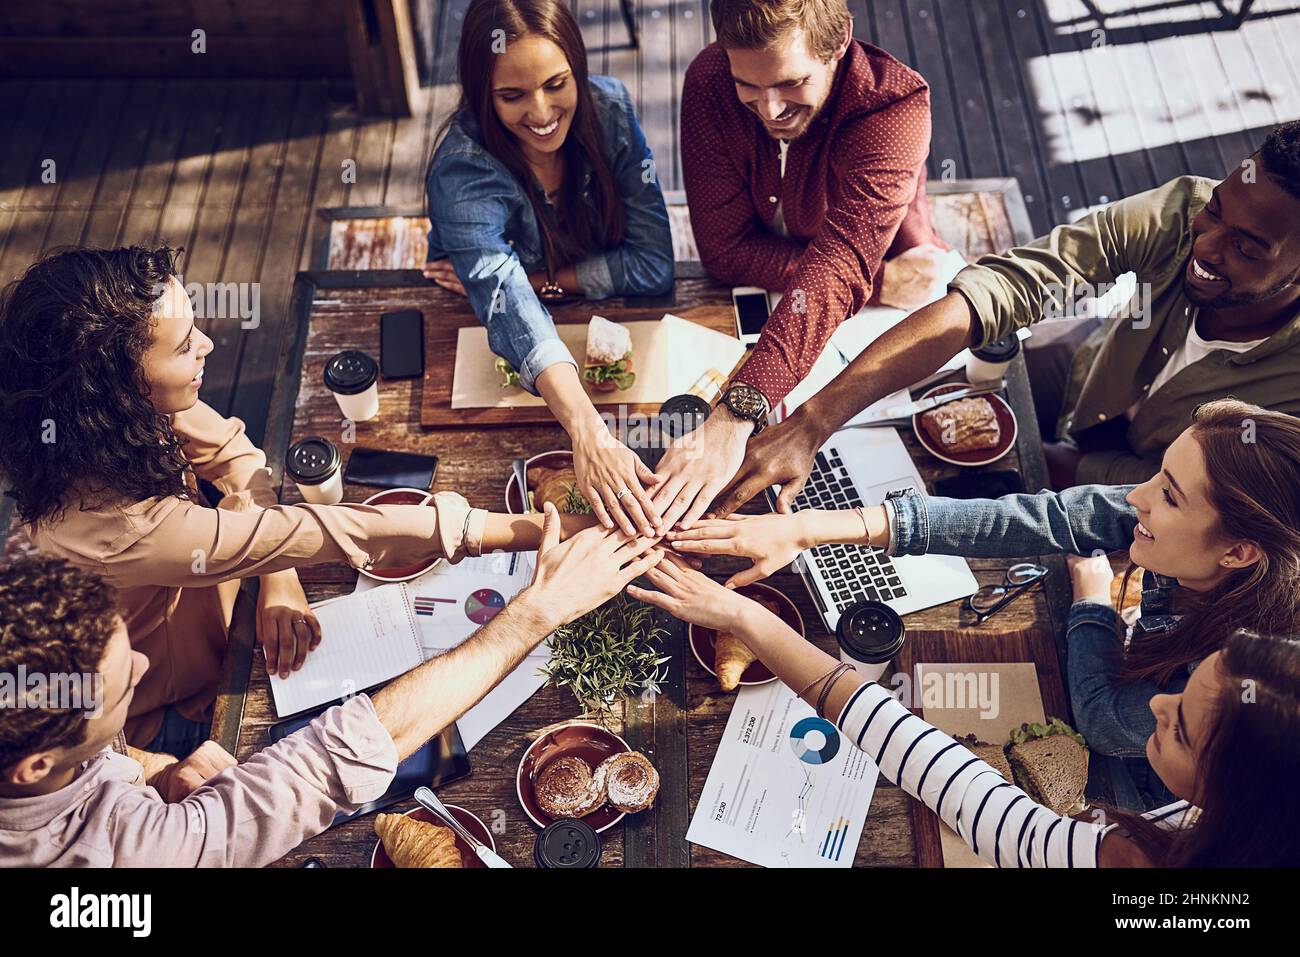 Because teams who eat together, stay together. High angle shot of a group of creative workers piling their hands while out on a business lunch. Stock Photo